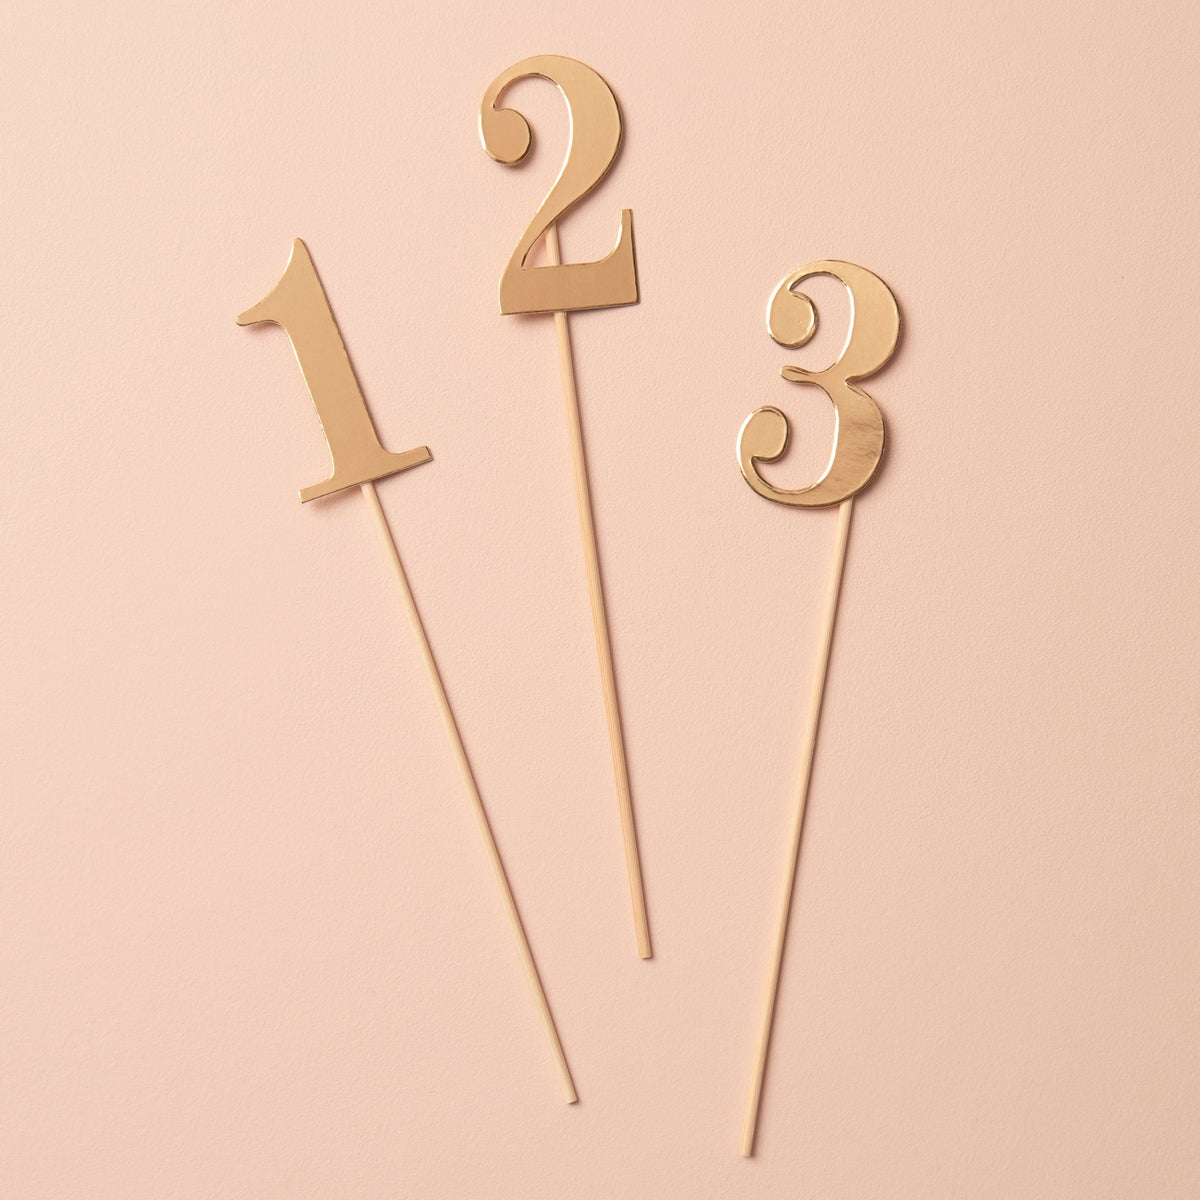 Table Number Picks - 12 Count Style Me Pretty Place Cards Holder